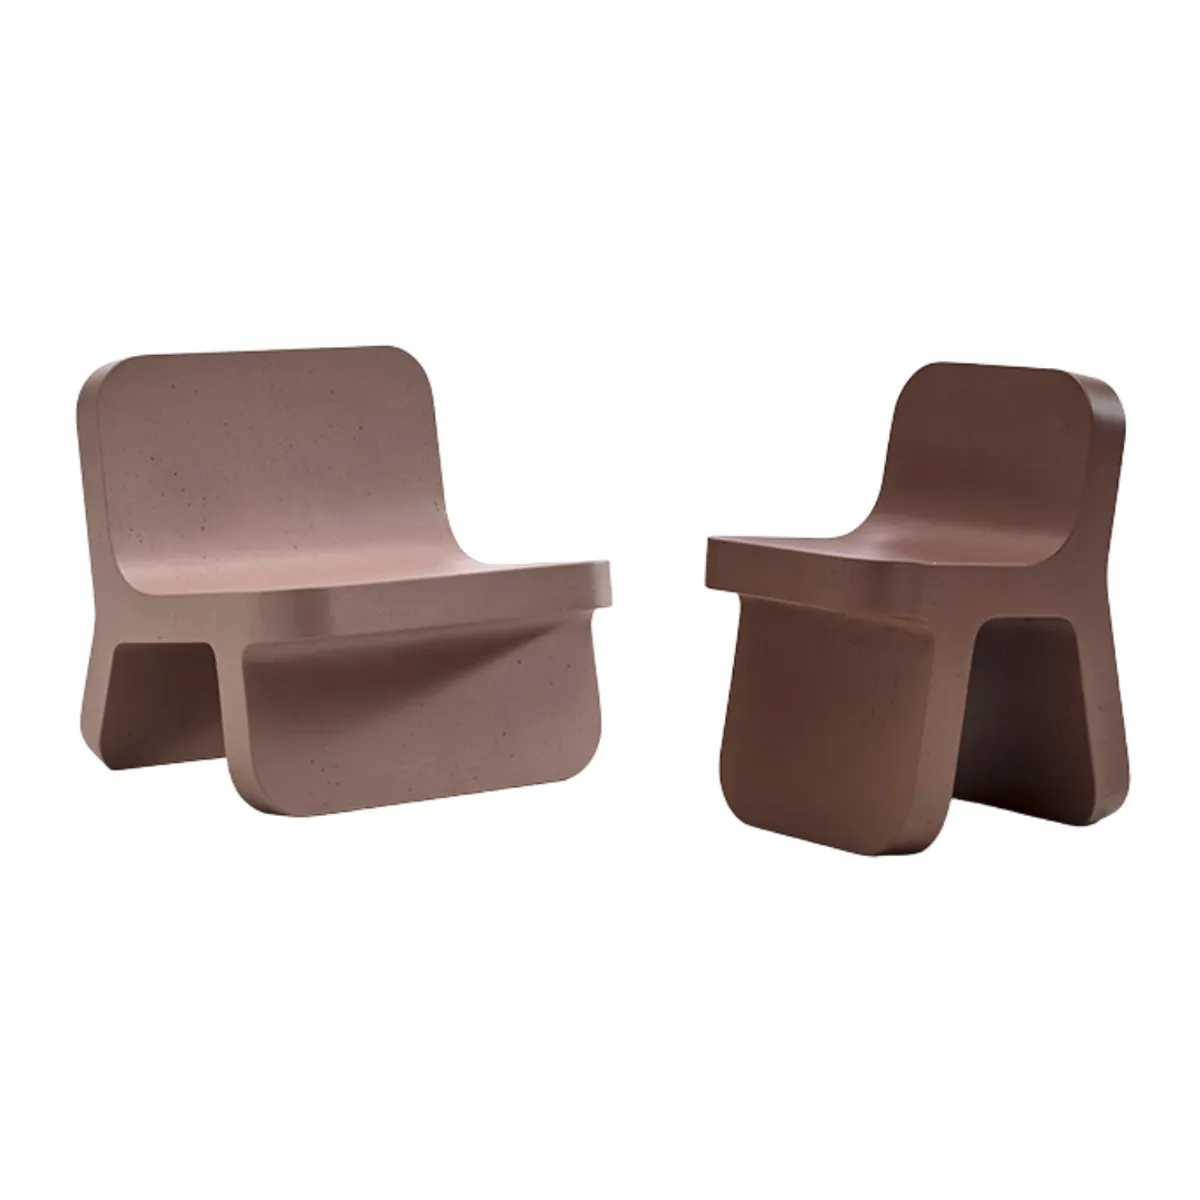 Appello lounge chair 4